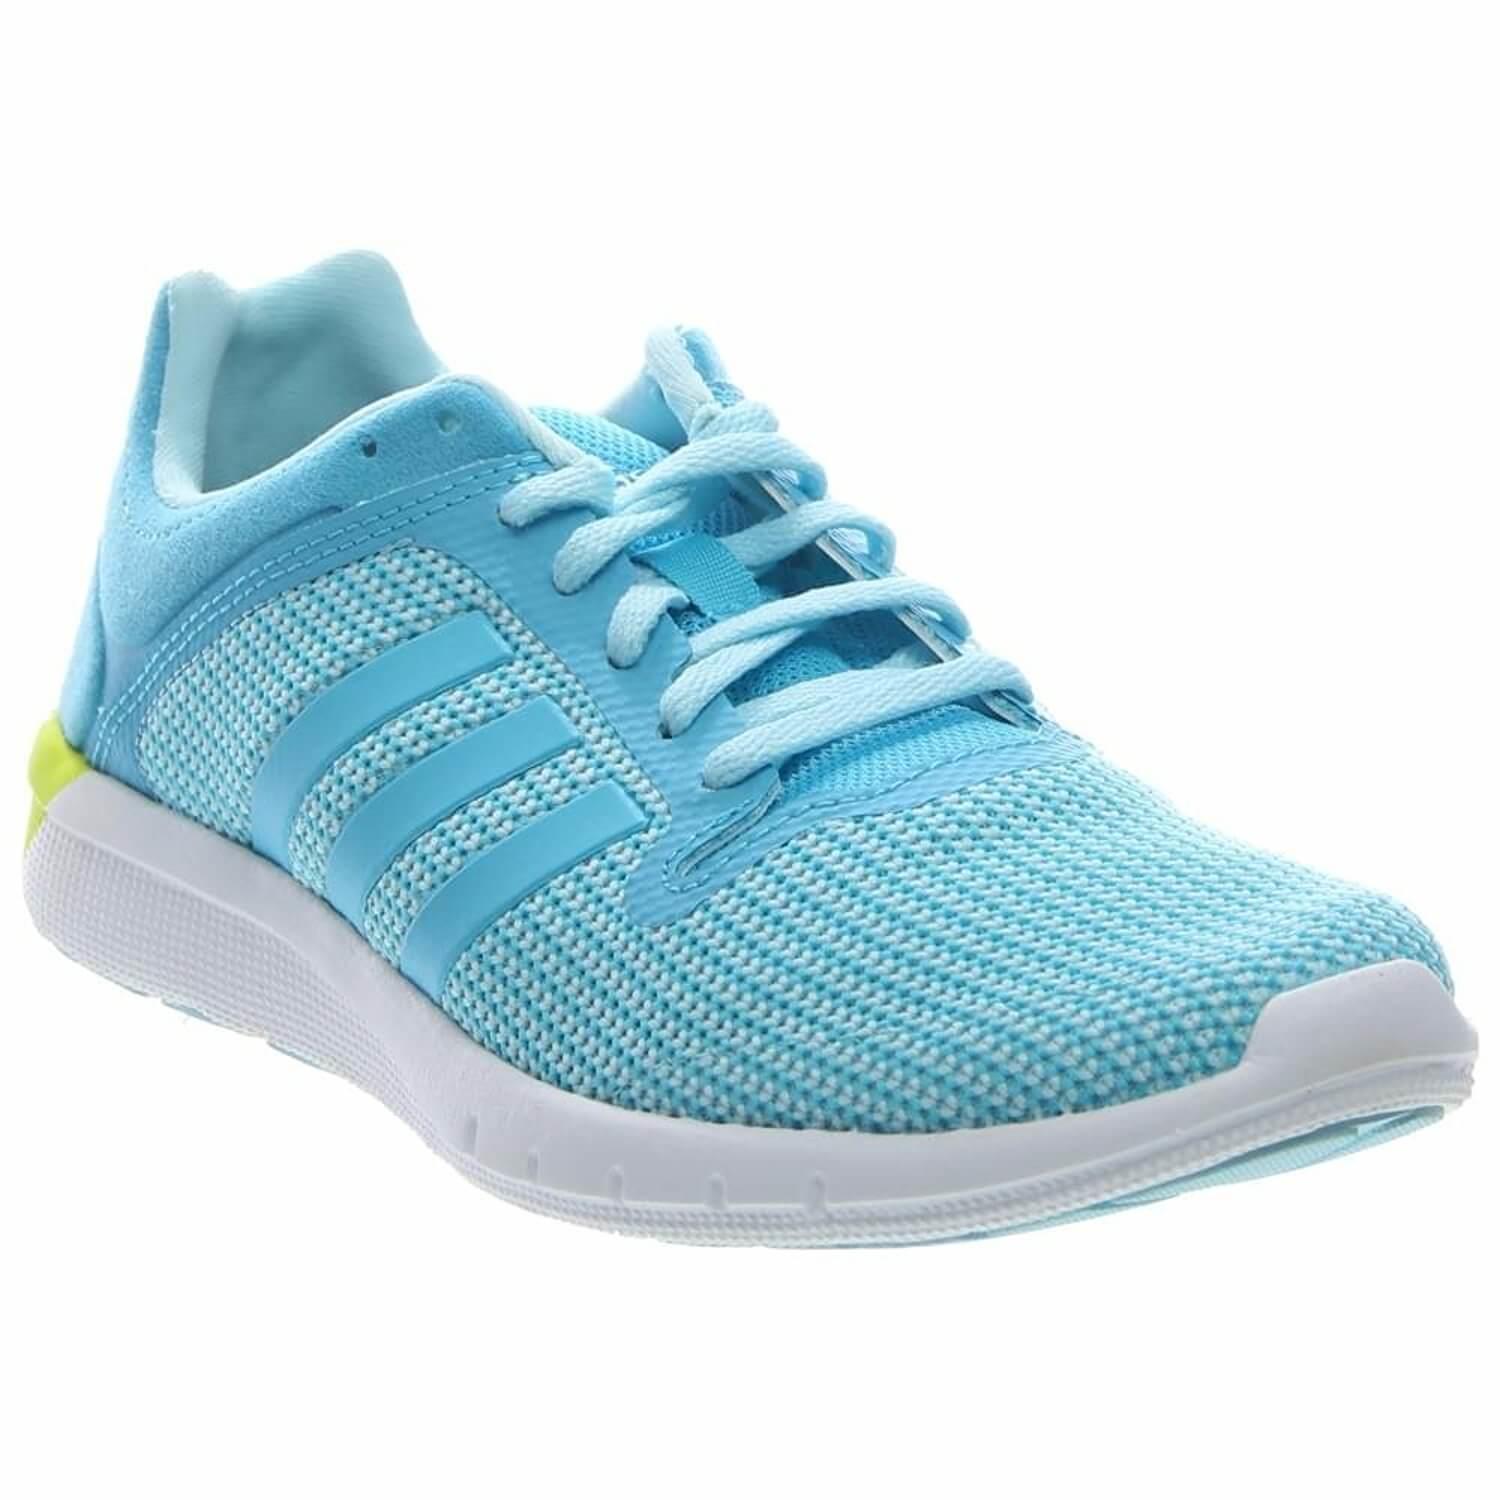 adidas climacool fresh 2 review